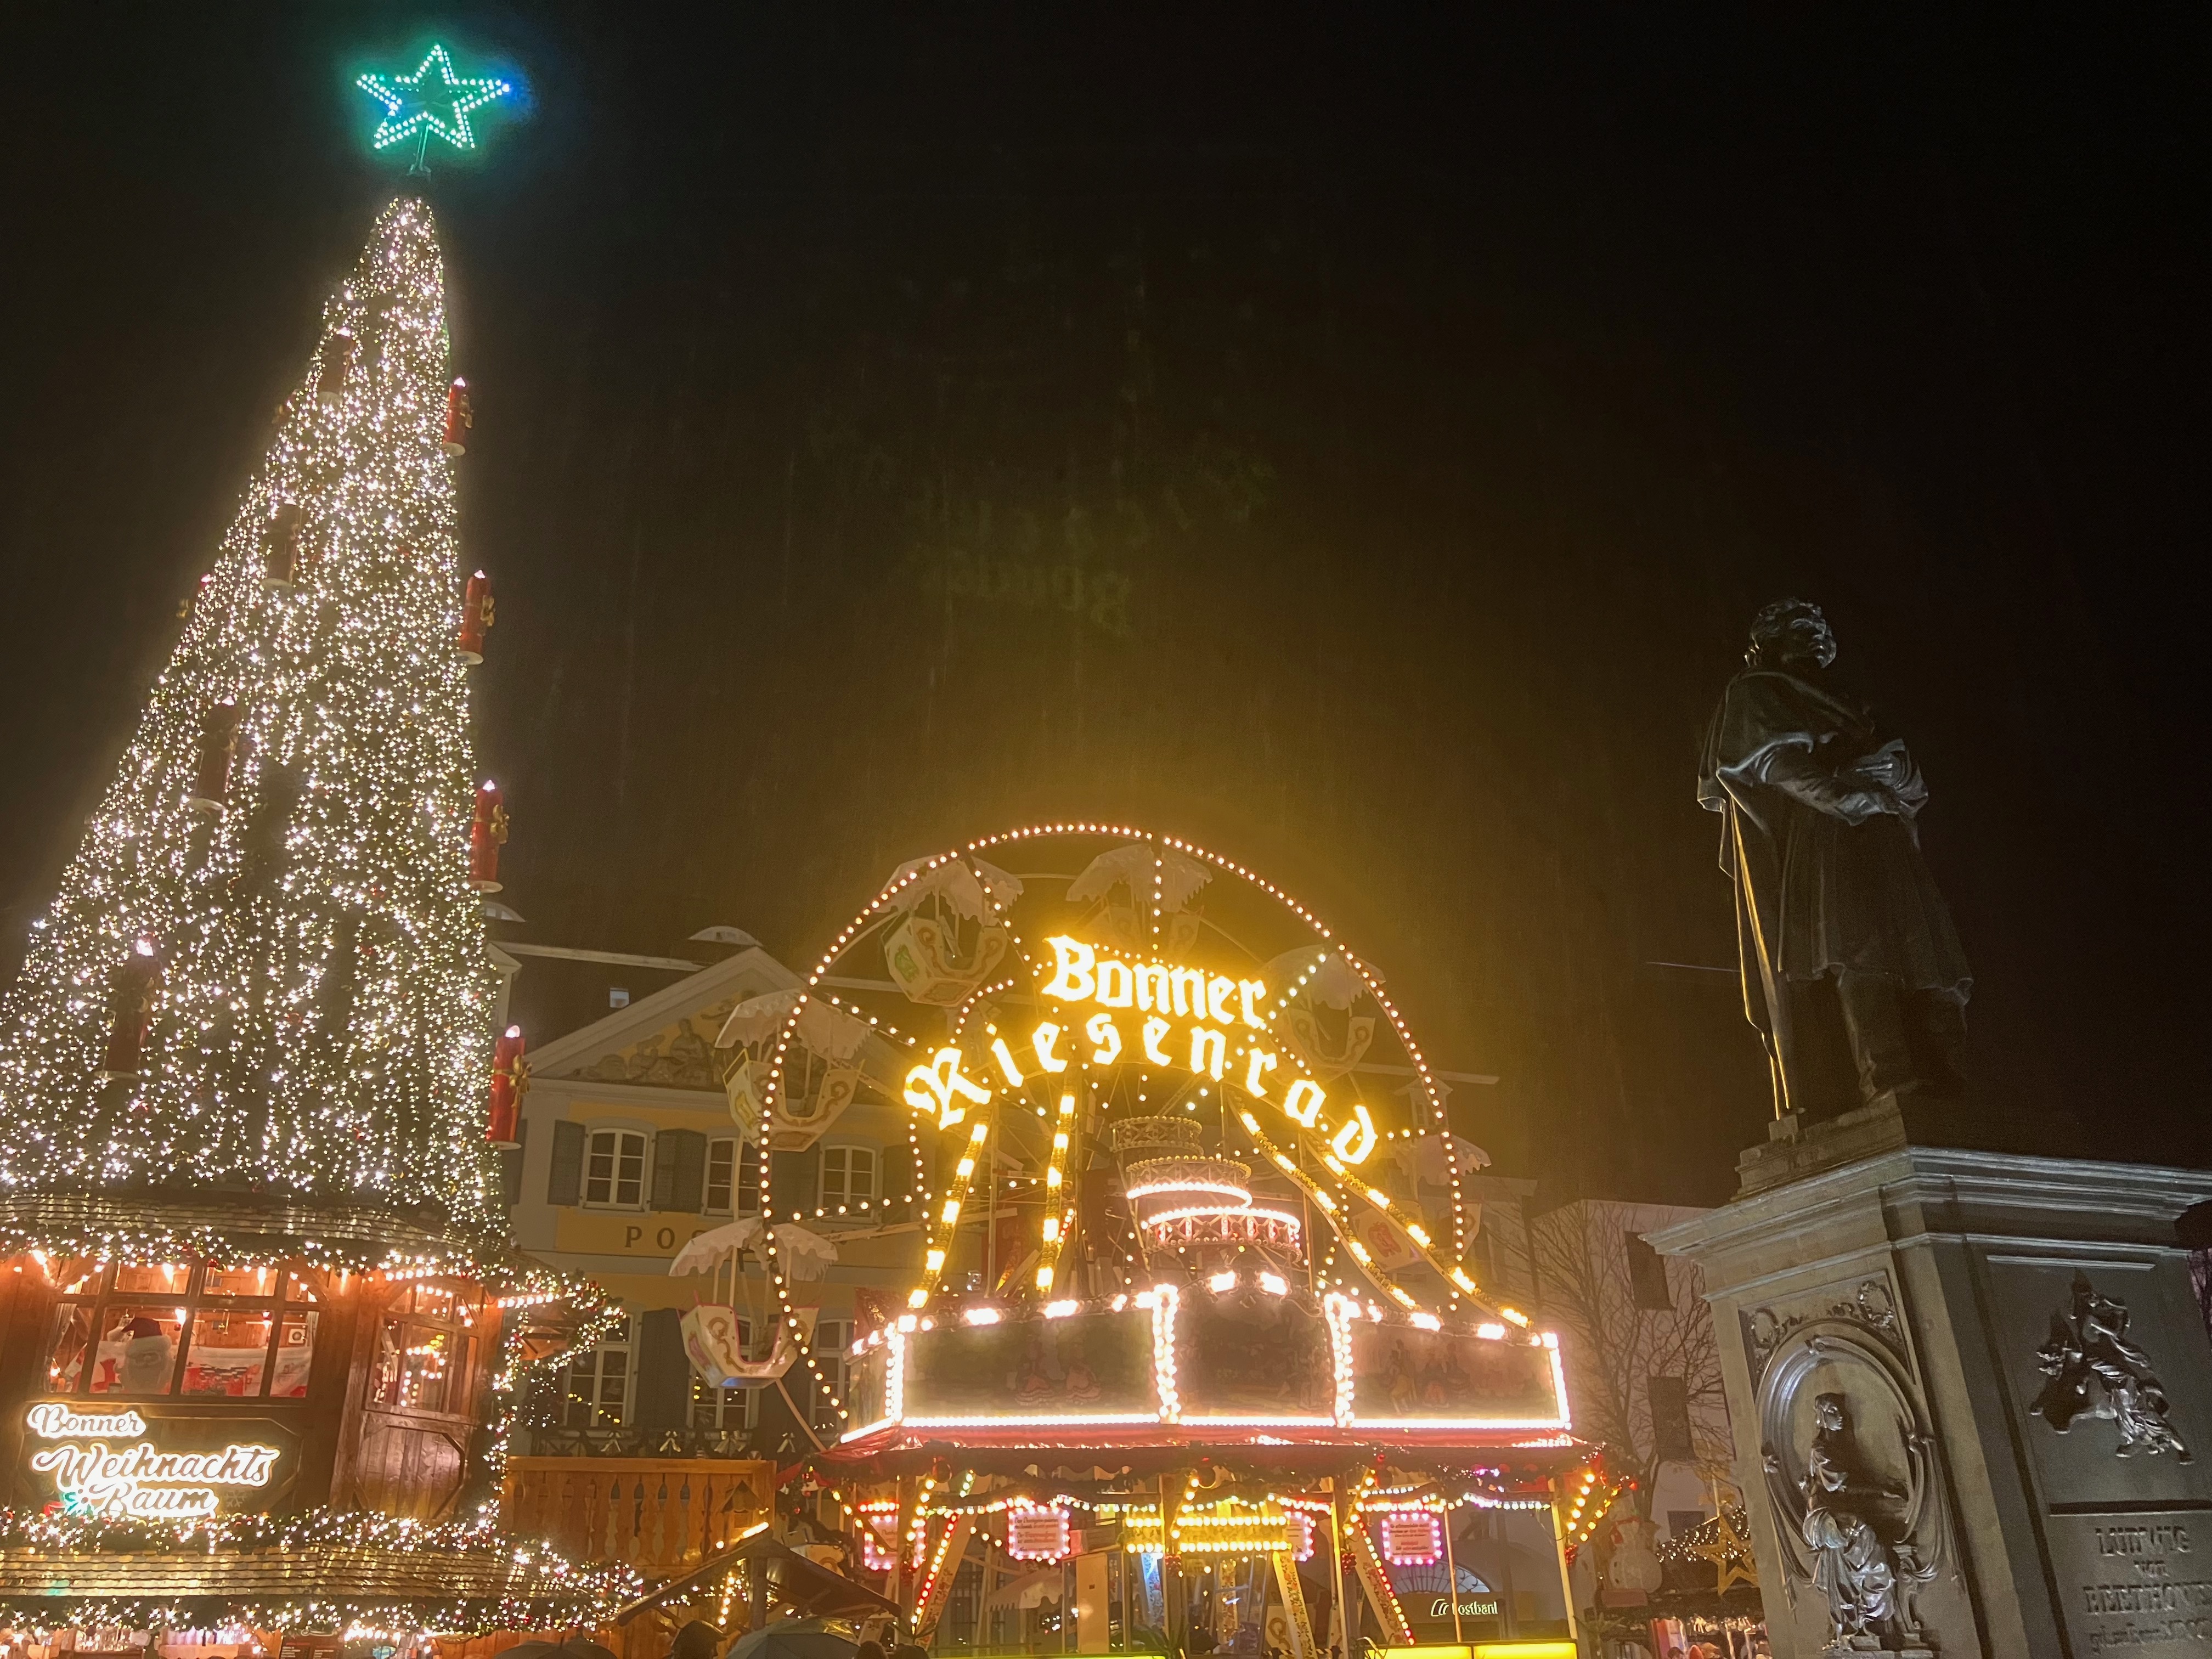 A statue of Beethoven is watched over by the Bonn Christmas Market wheel and tree in Bonn. It is nighttime and the wheel and tree are very brightly lit.